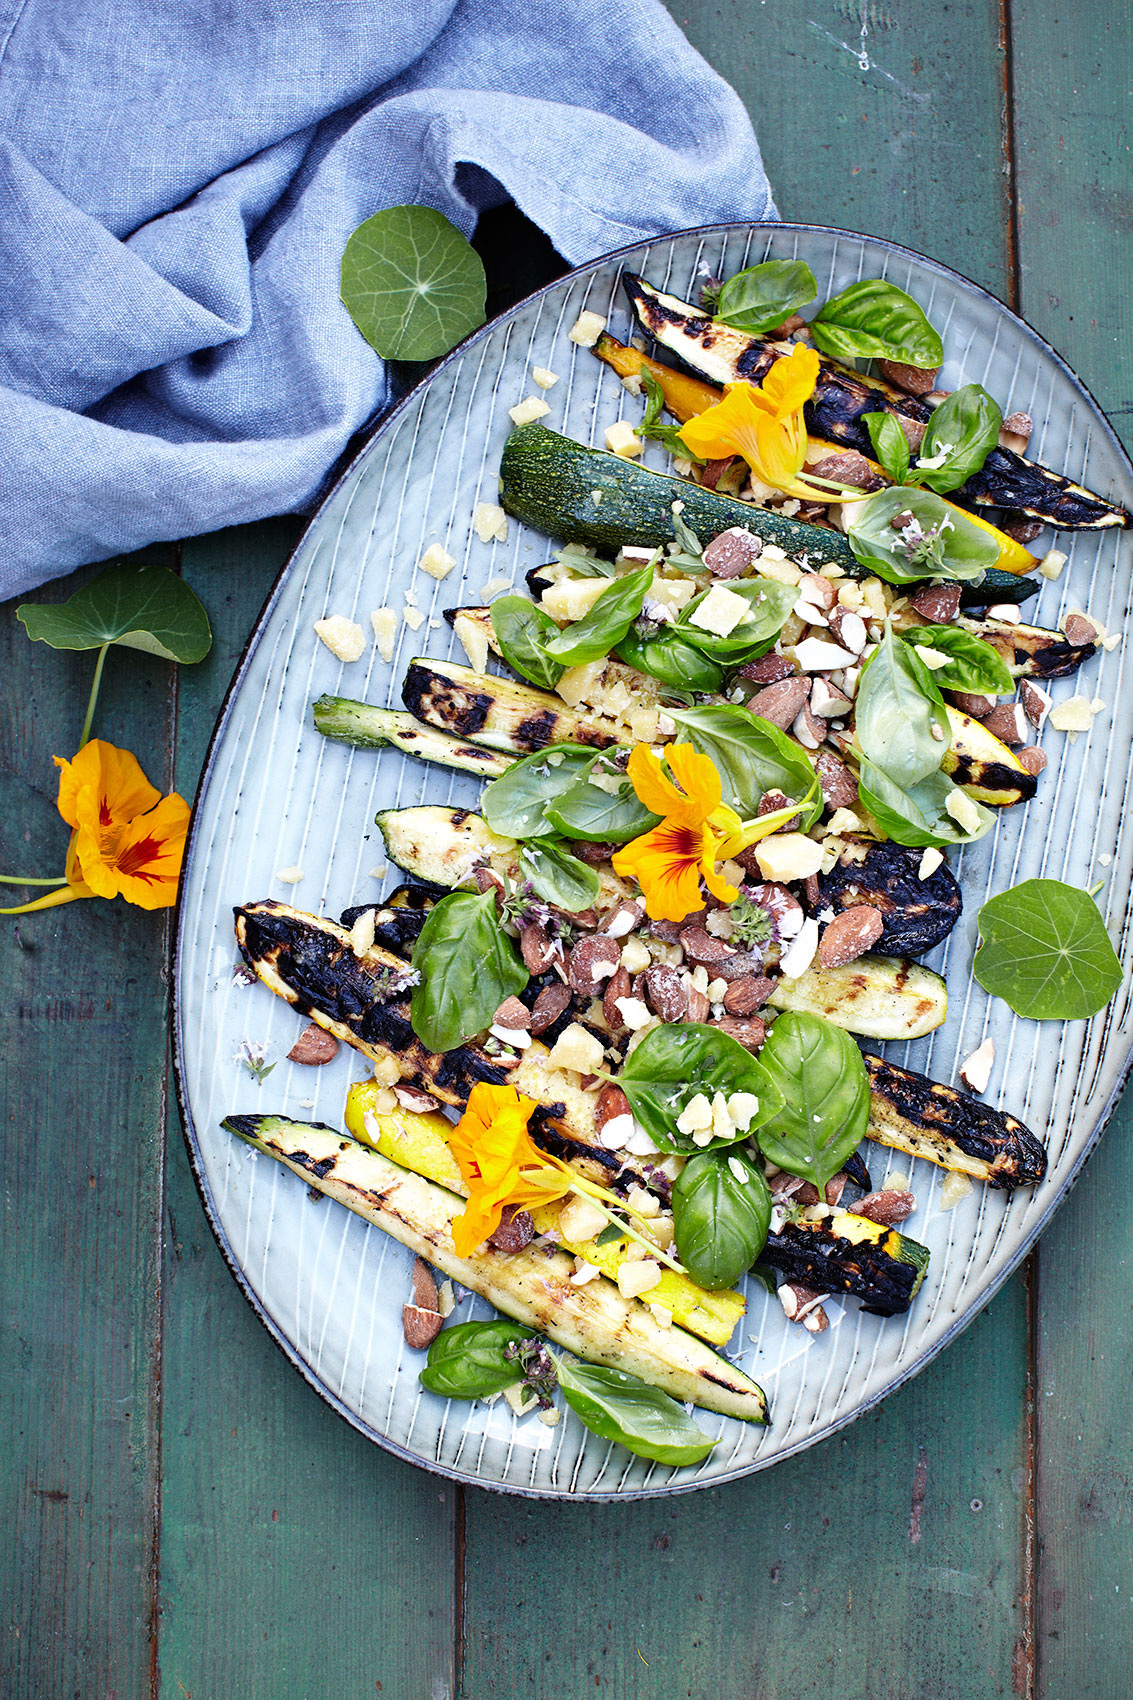 Stedsans in the Woods • Grilled Courgettes with Basil & Yellow Morning Glory • Lifestyle & Editorial Food Photography